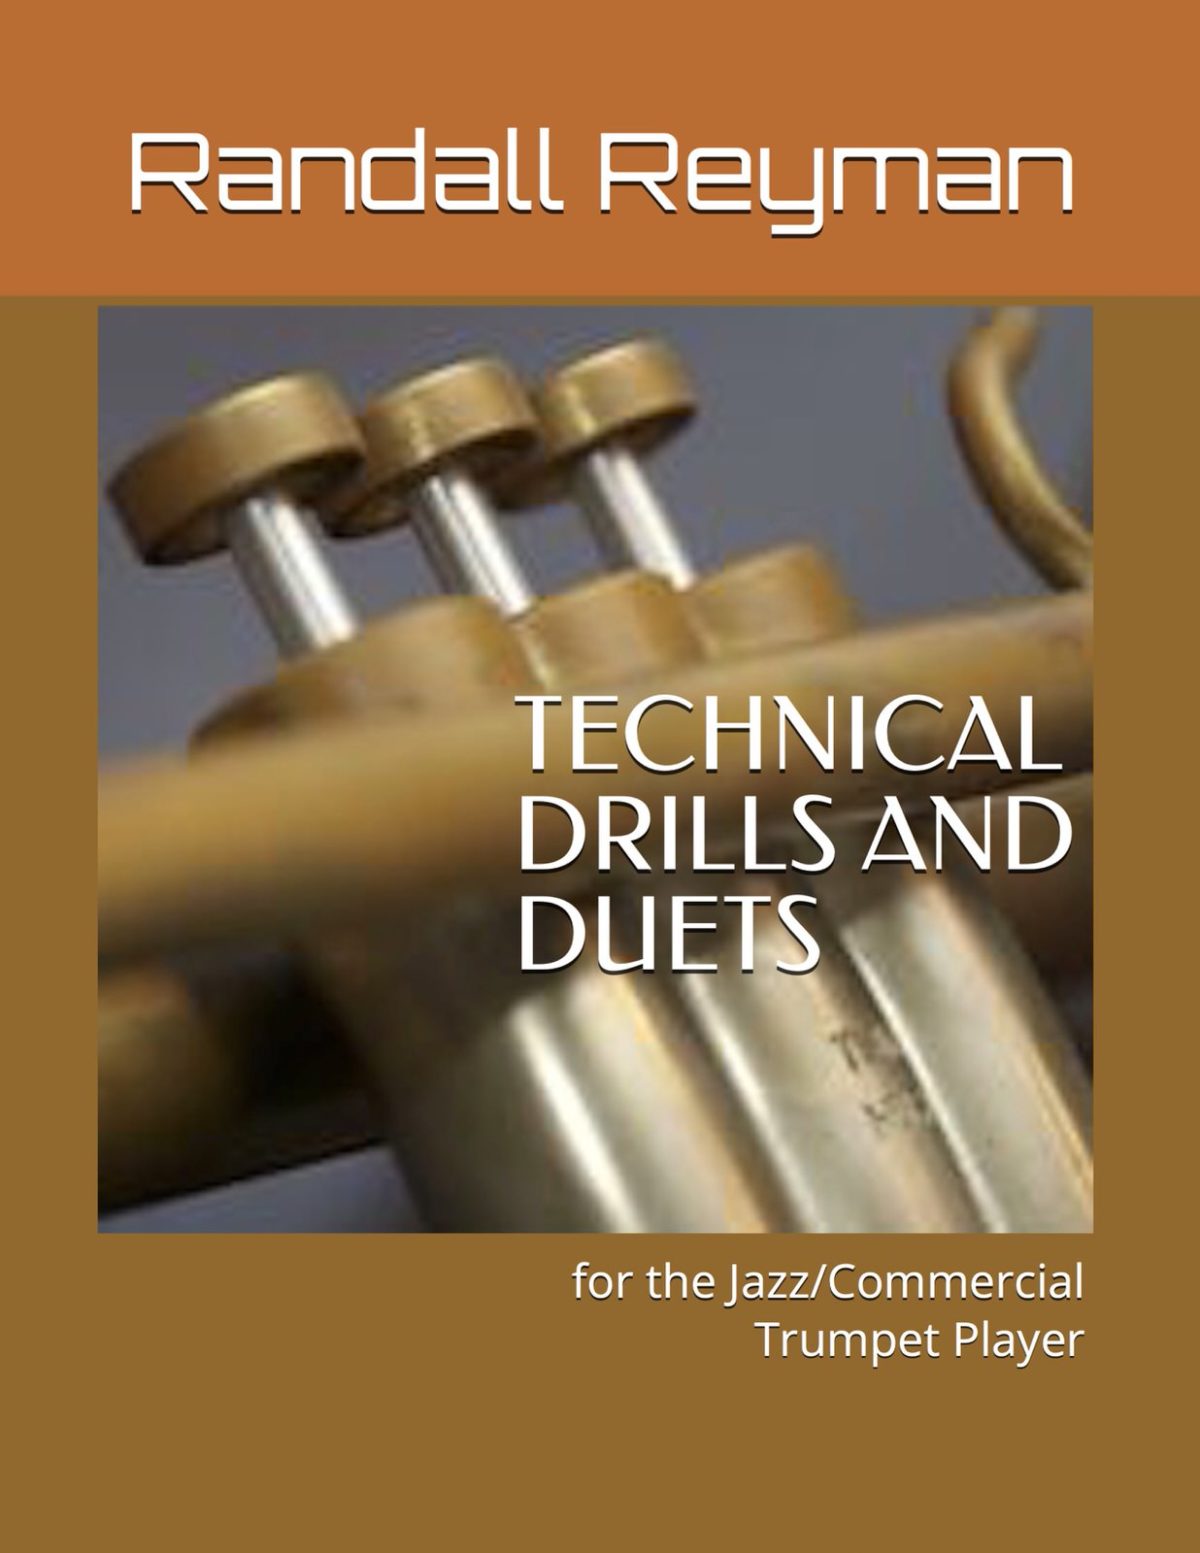 Technical Drills and Duets for the Jazz/Commercial Trumpet Player